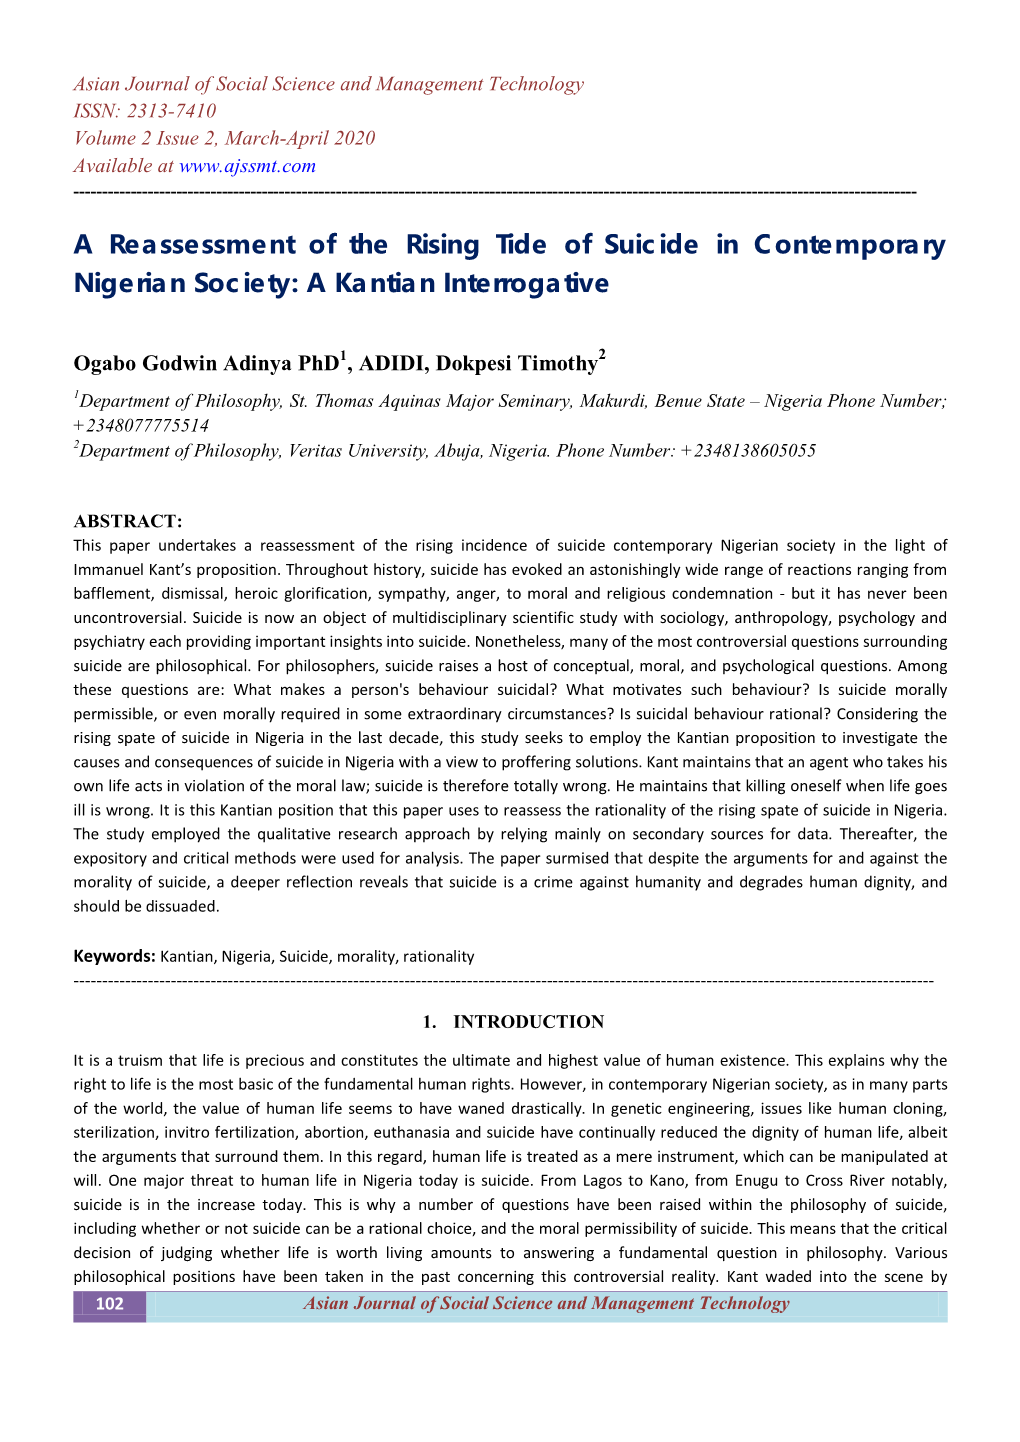 A Reassessment of the Rising Tide of Suicide in Contemporary Nigerian Society: a Kantian Interrogative